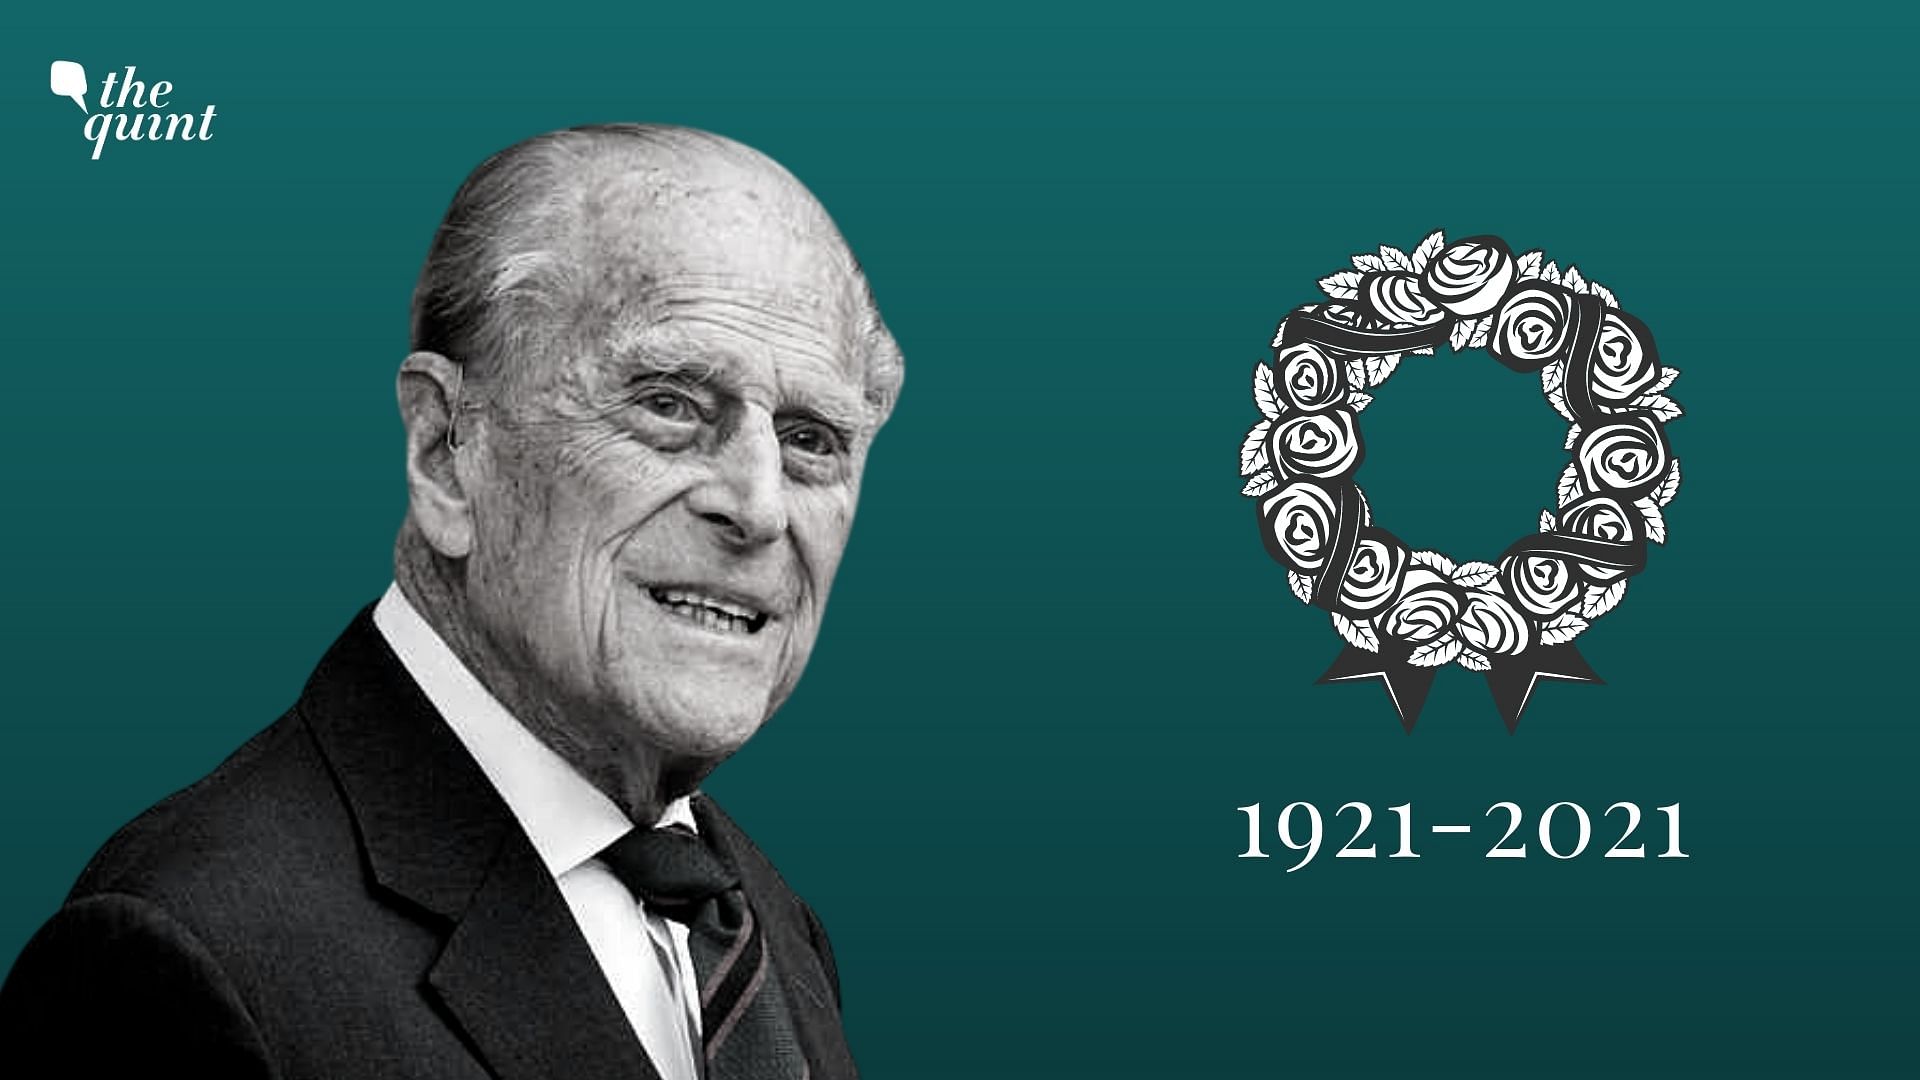 Prince Philip, Duke of Edinburgh and husband to UK’s Queen Elizabeth II passed away at 99 on Friday, 9 April.